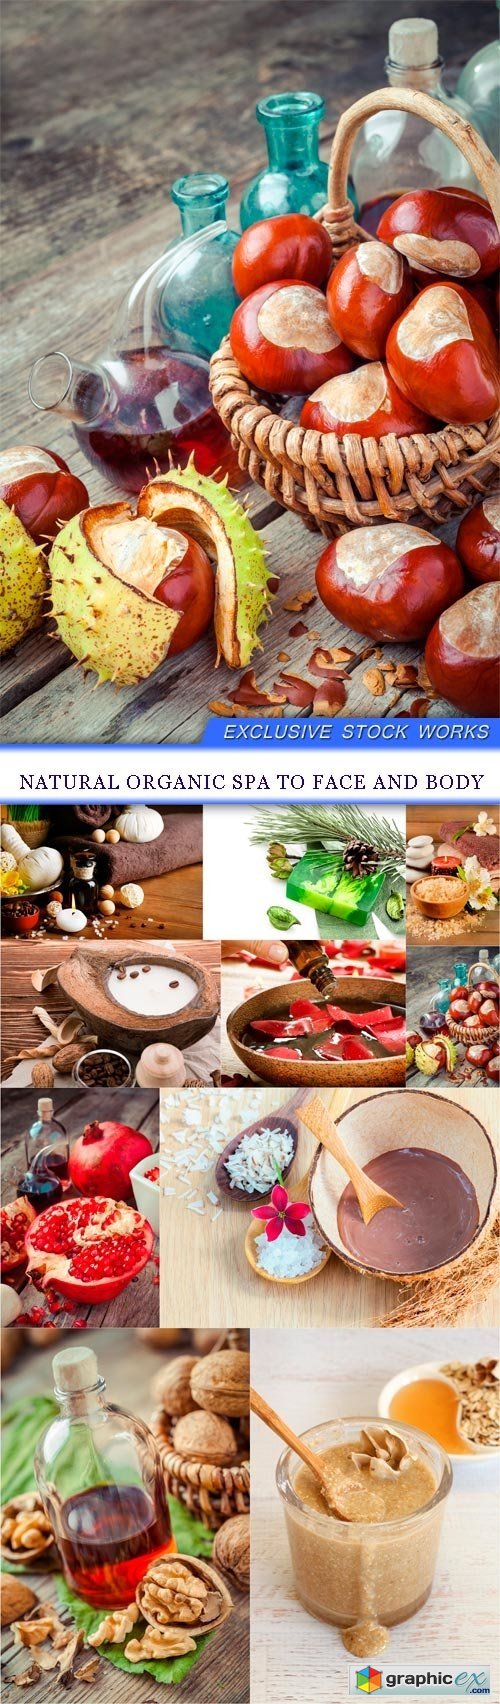 Natural organic spa to face and body 10X JPEG